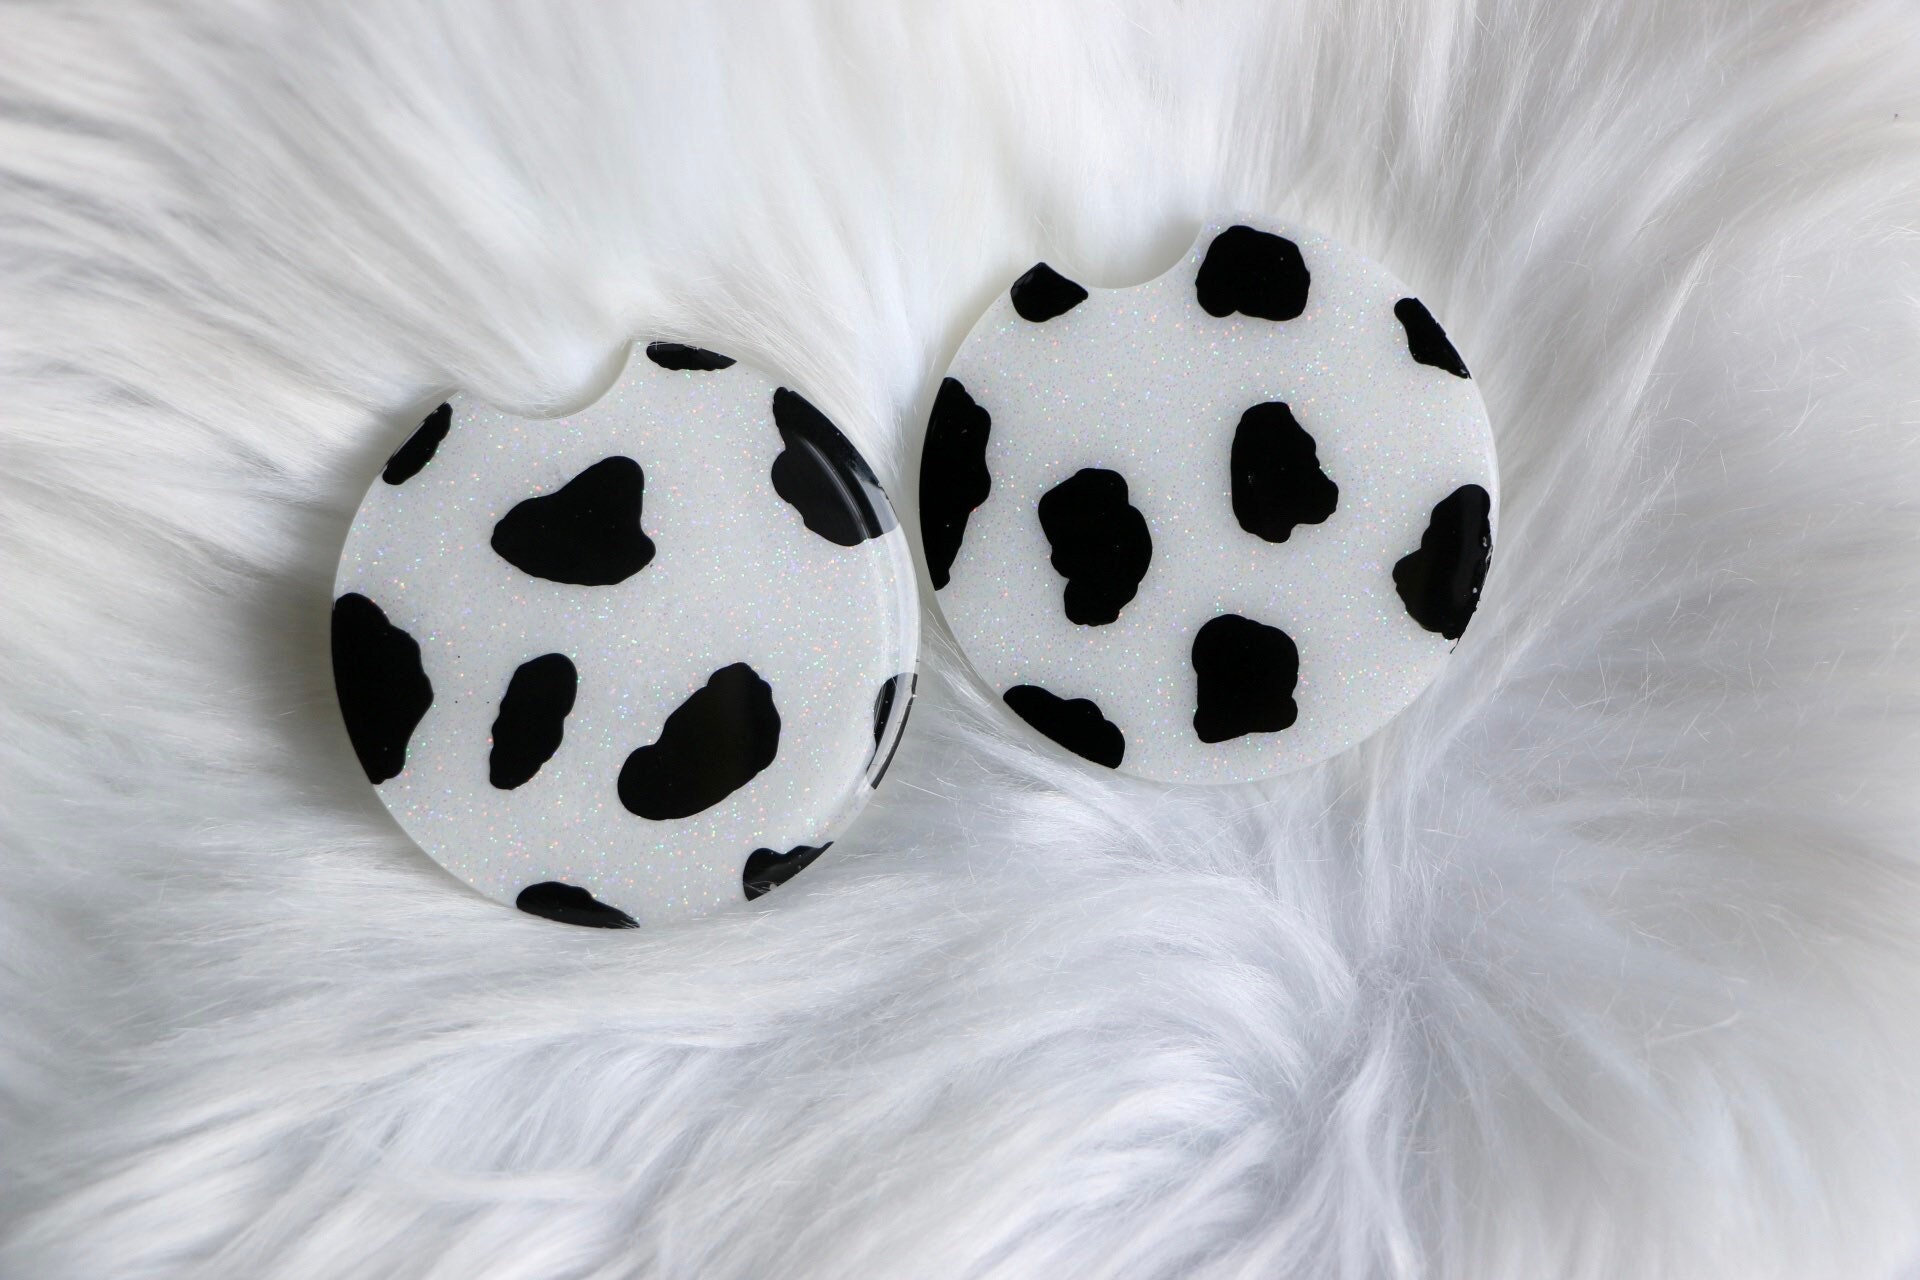 Cow Print Car Coasters, Gifts for Her Cup Holder Coaster for Car